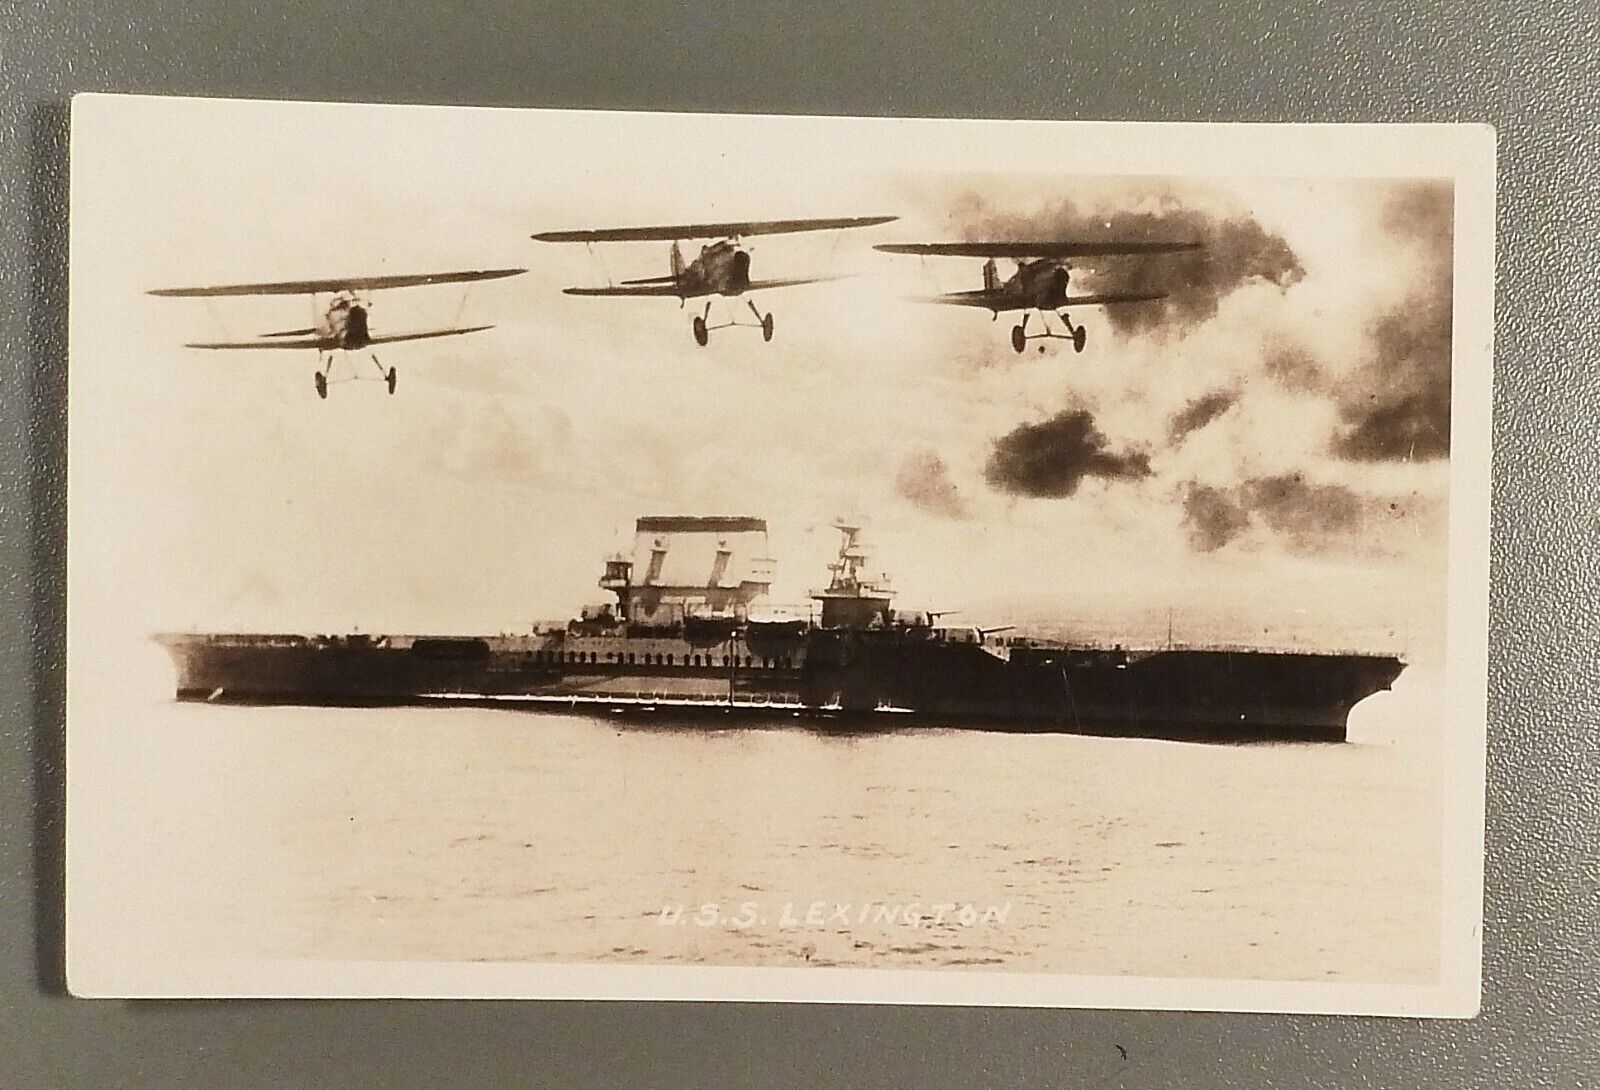 c.1930's Photos of 3 Navy Biplanes off of the U.S.S. Lexington Aircraft Carrier.